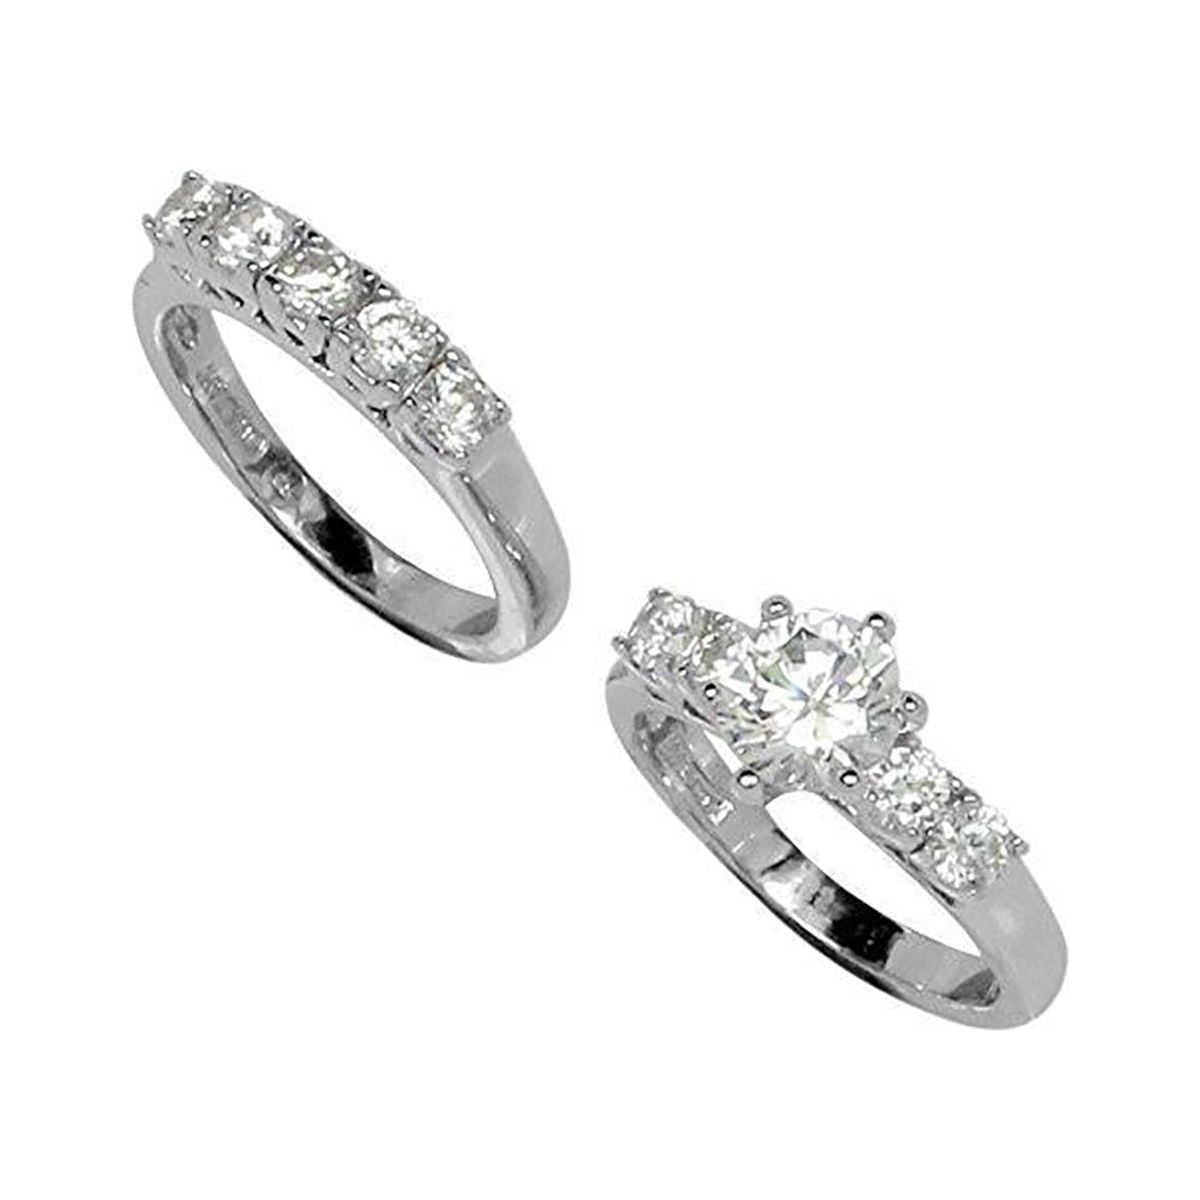 Two-Ring Wedding Set Style 6-Prong Stainless Steel Rings